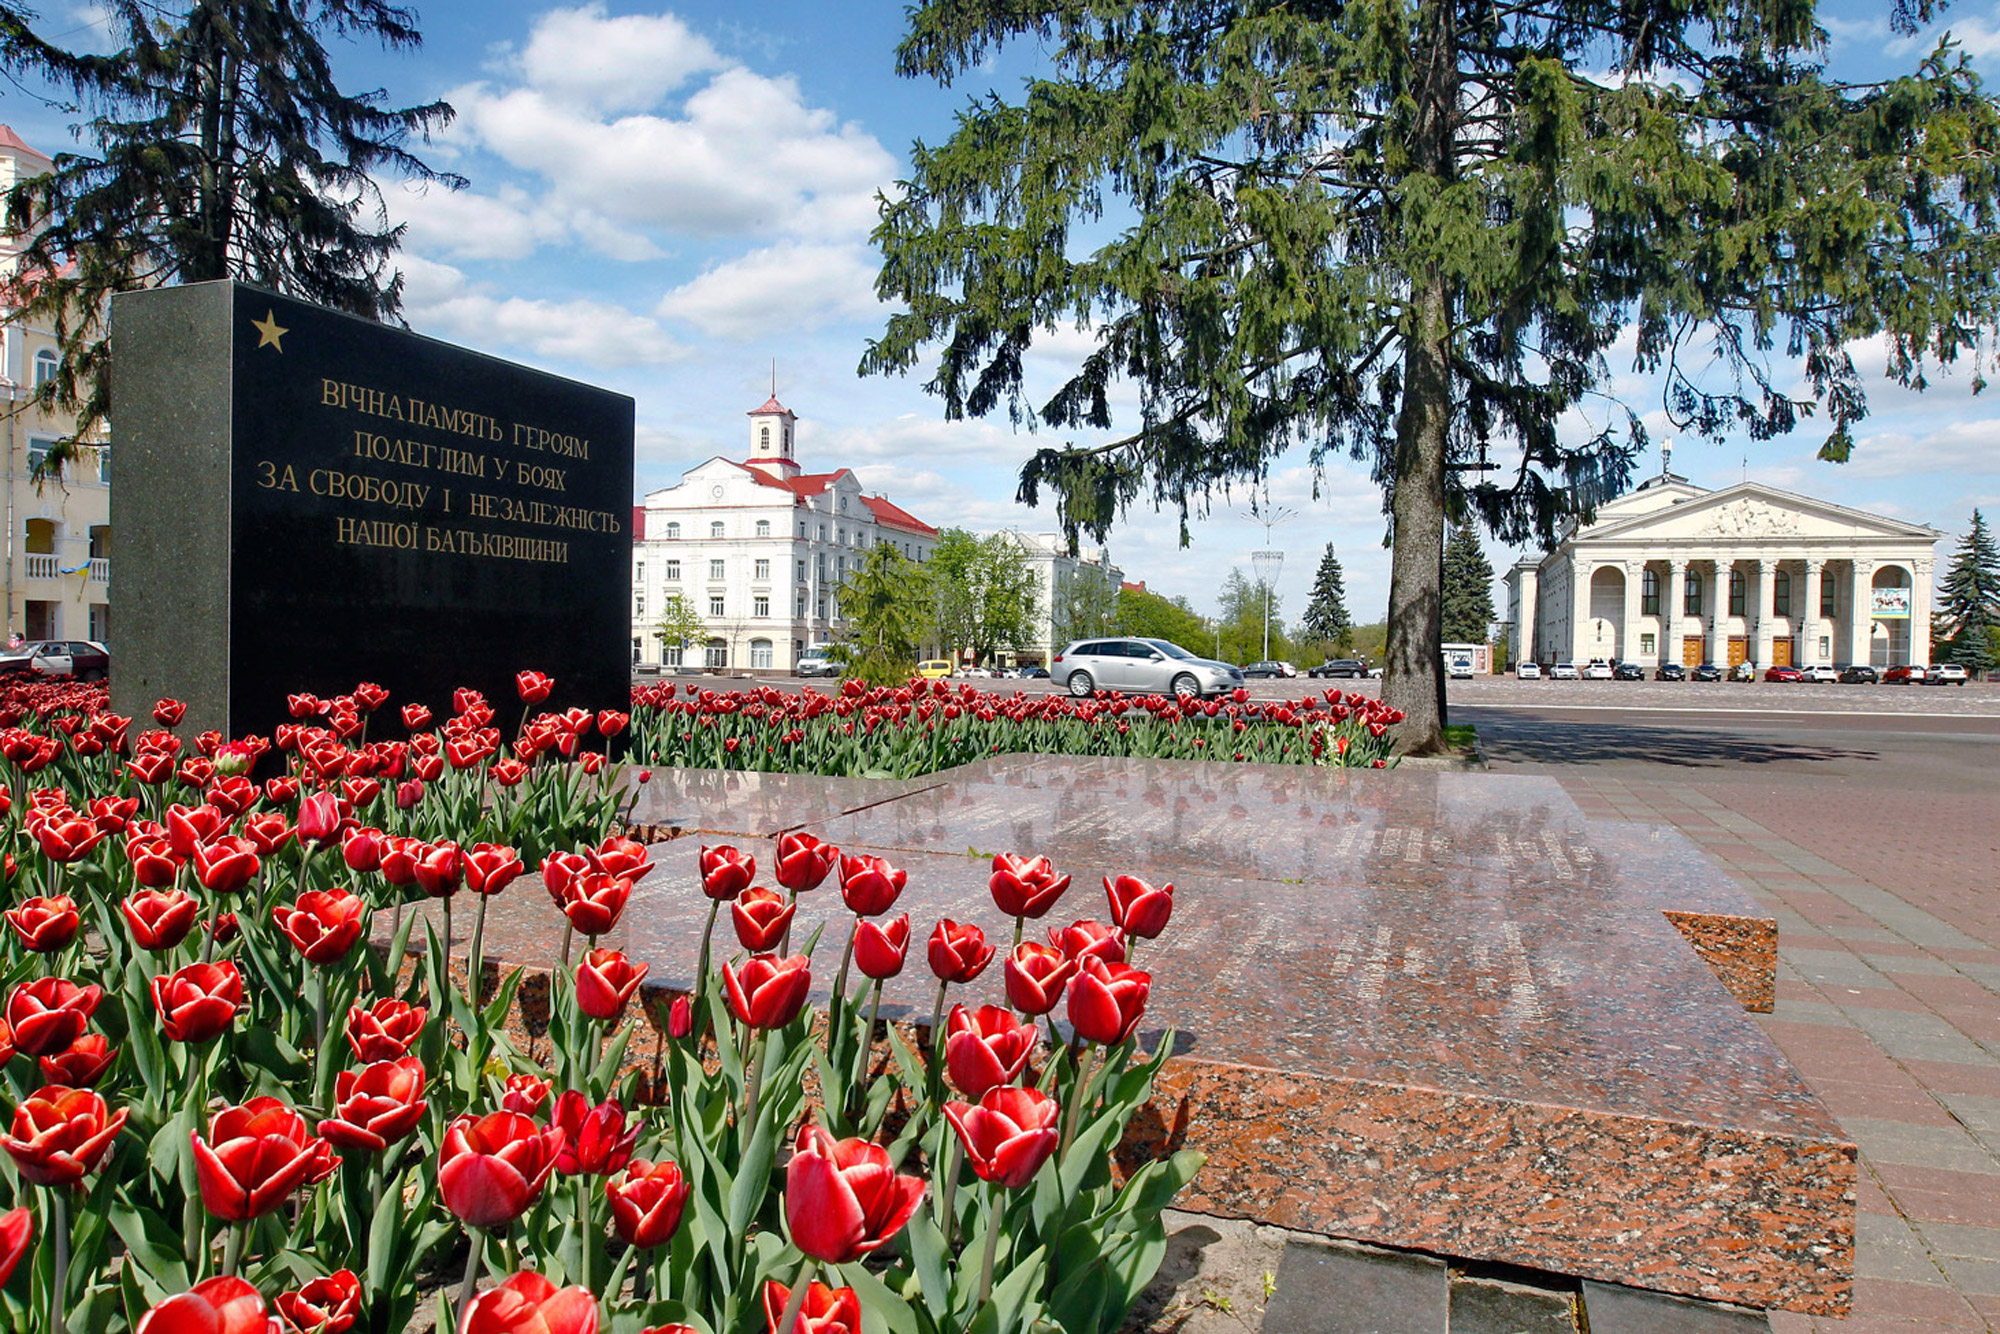 Bright red tulips around a black stone memorial, official building in the background